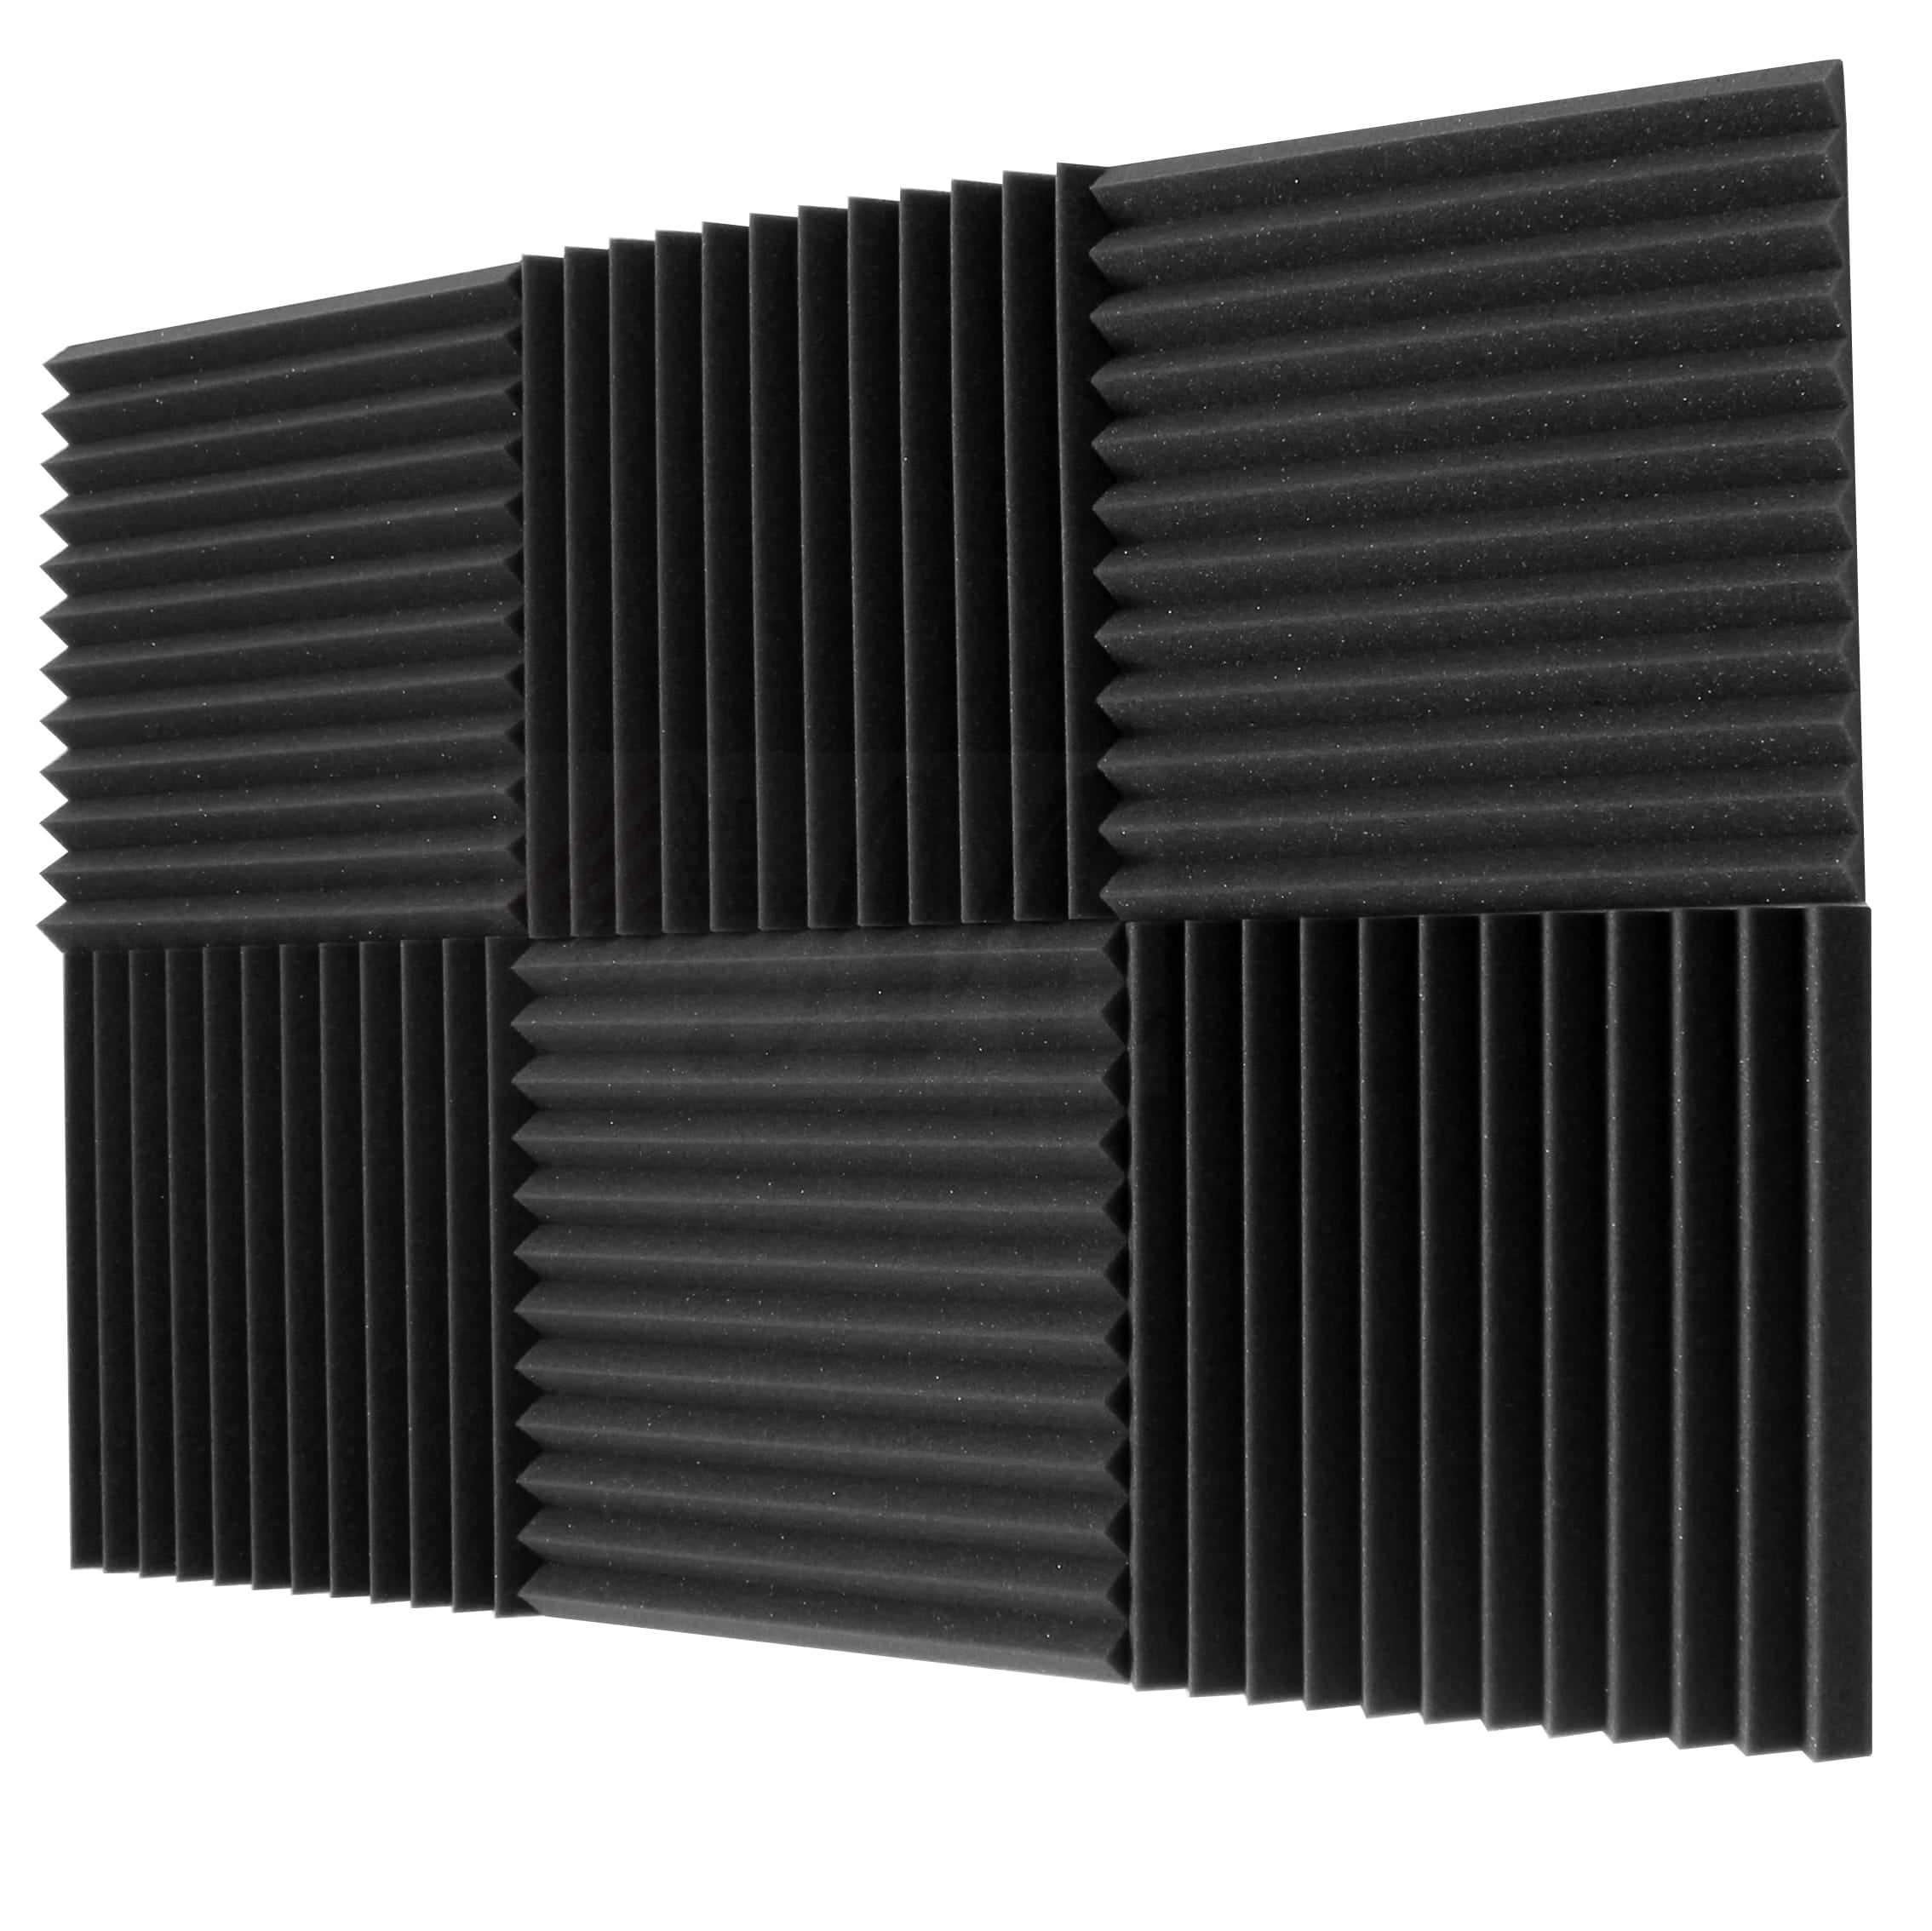 48 Pack Acoustic Foam Panel Wedge Studio Soundproofing Wall Tiles 1" X 12" X 12" 